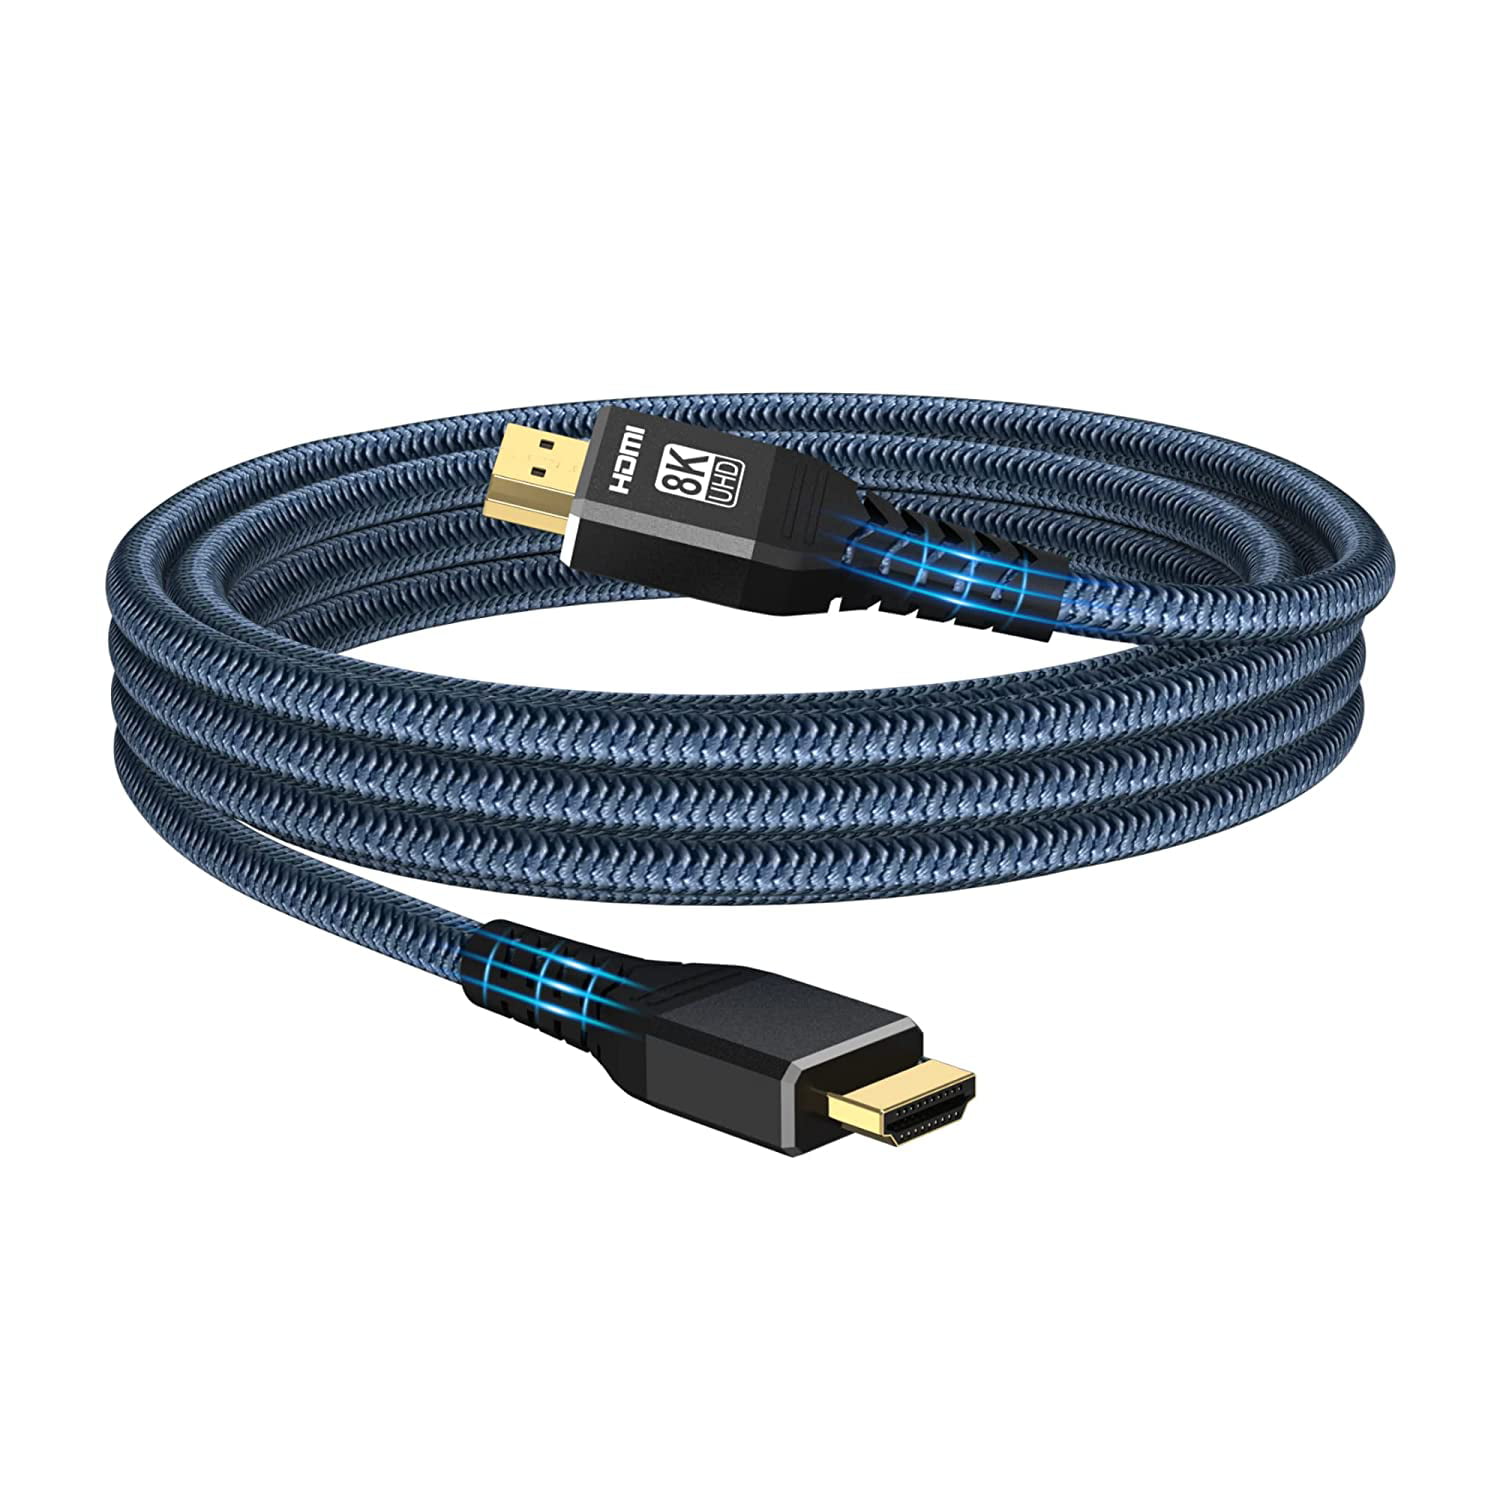 8K HDMI 2.1 Cable 10ft, iXever Certified HDMI Cable 8K@60Hz 4K@144Hz Ultra  HD High